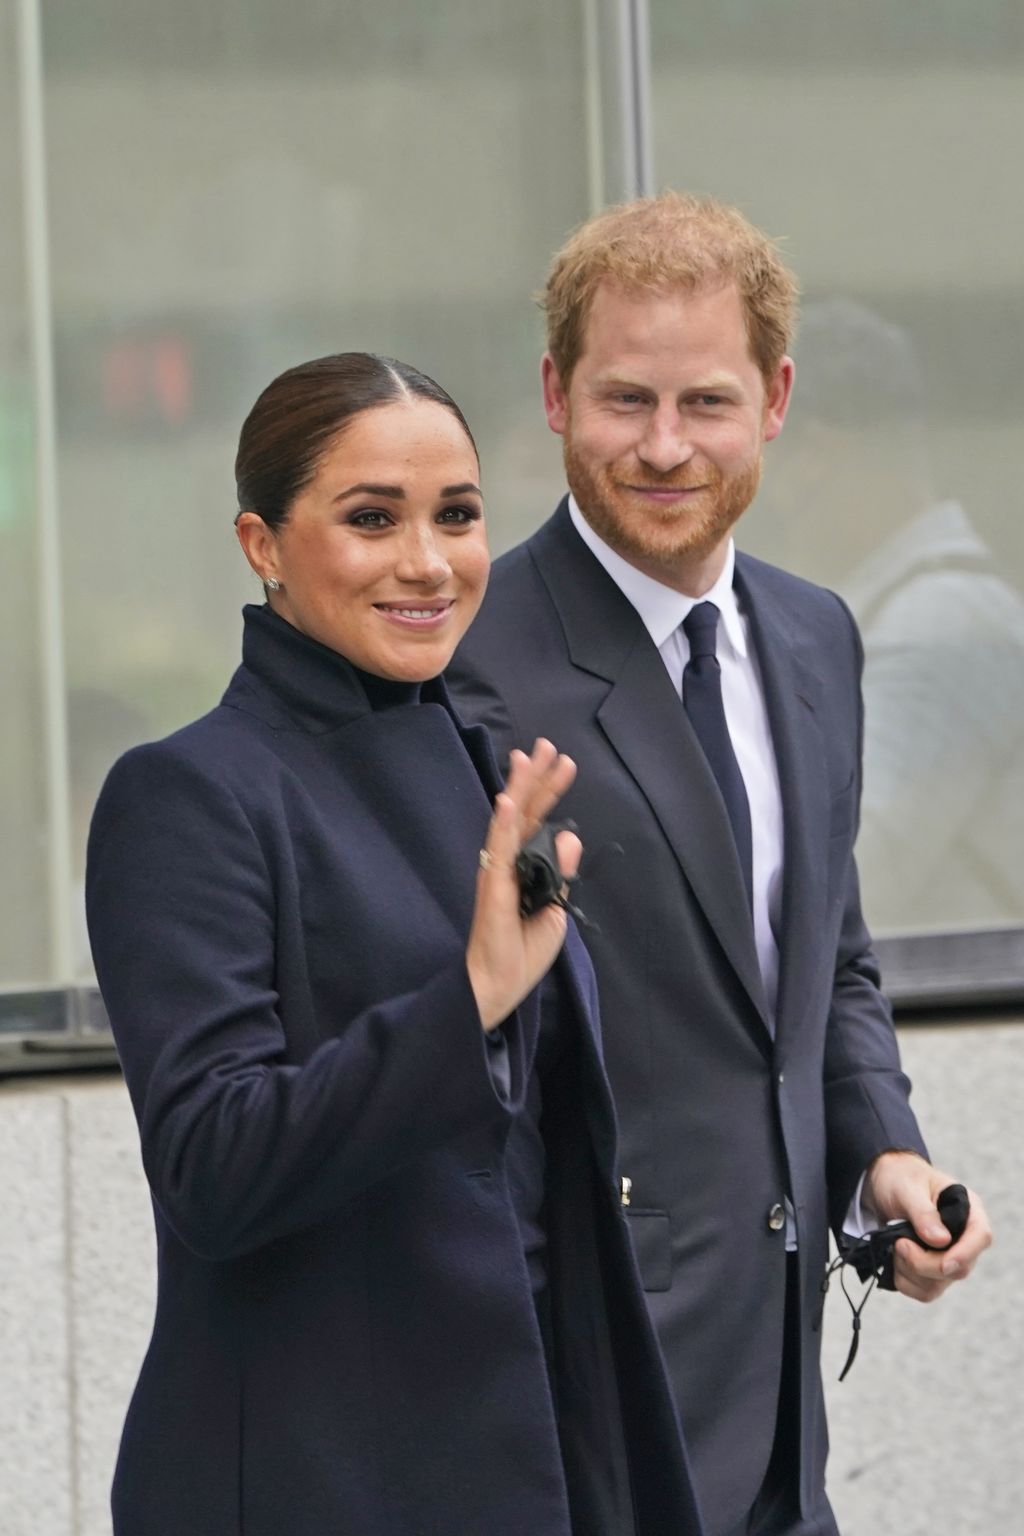 Meghan Markle and Prince Harry pause while getting a tour of the National September 11 Memorial & Museum in New York, Thursday, Sept. 23, 2021. The Duke and Duchess of Sussex got a hawk's-eye view of New York City with a visit to the rebuilt World Trade Center's signature tower. (AP Photo/Seth Wenig)